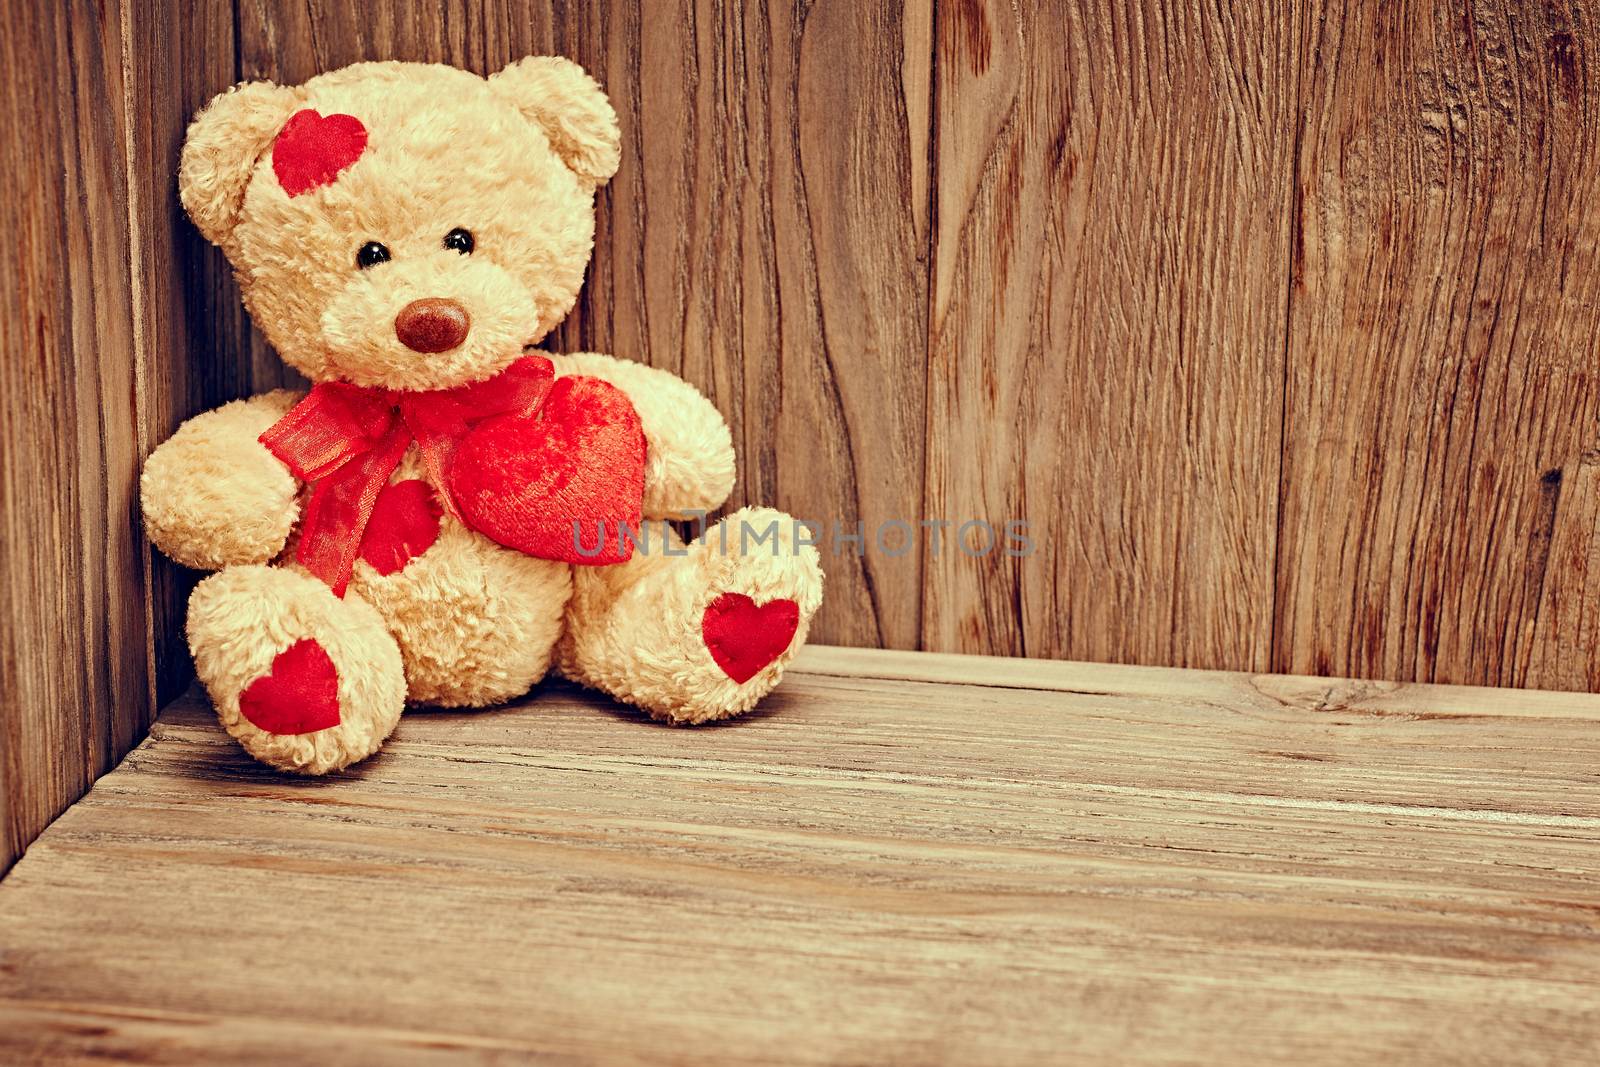 Valentines Day. Teddy Bear Loving cute with red hearts sitting alone waiting for love. Vintage. Retro romantic styled on wooden background. Copyspase